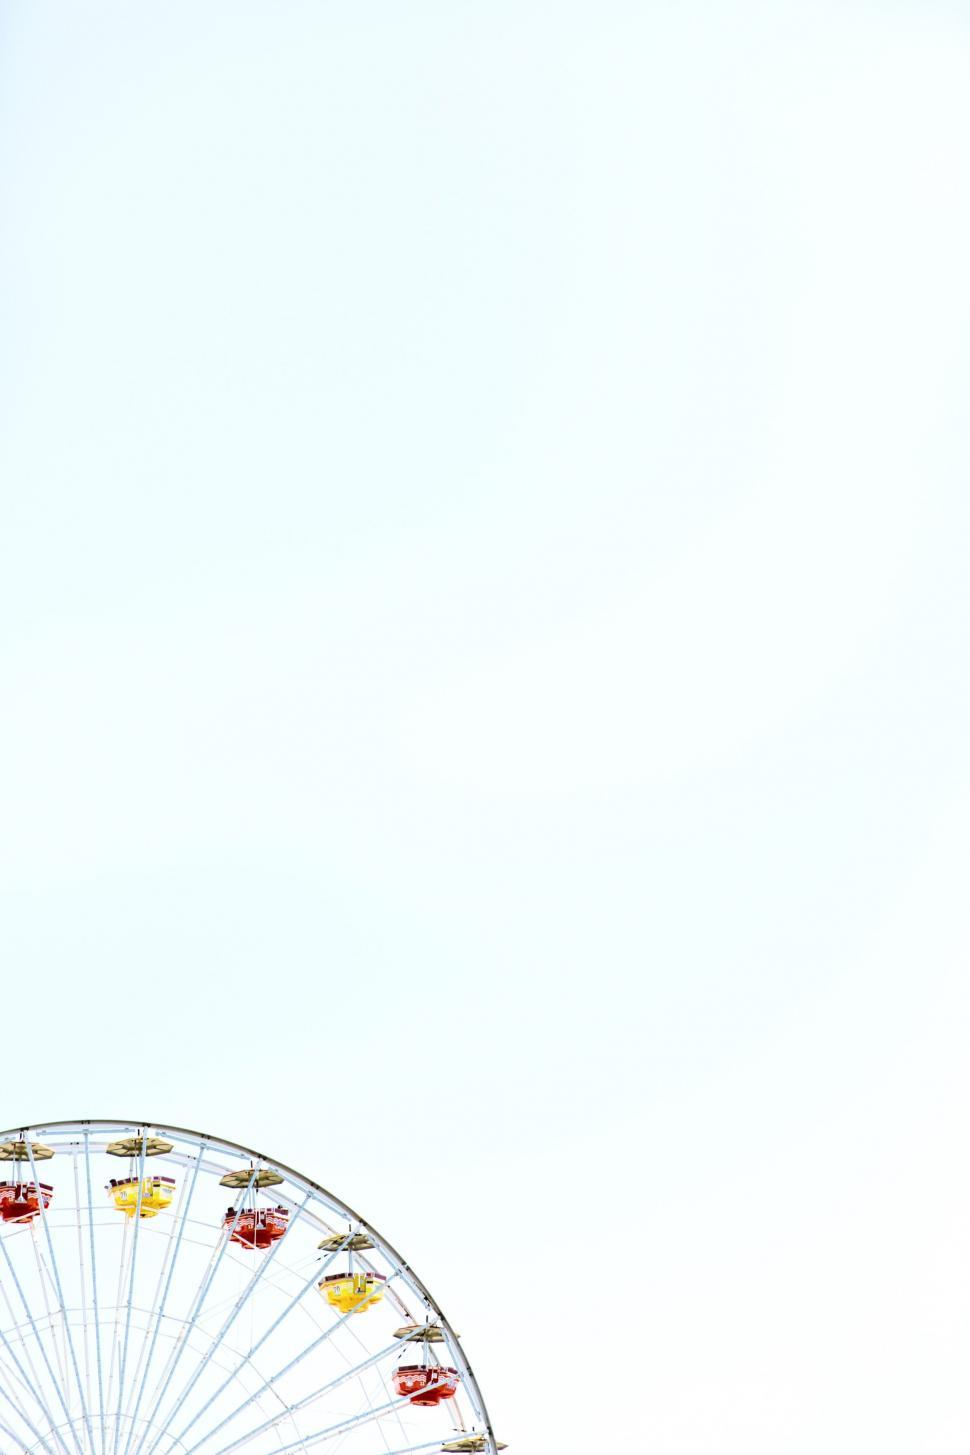 Free Image of Ferris Wheel Next to Tall Building 